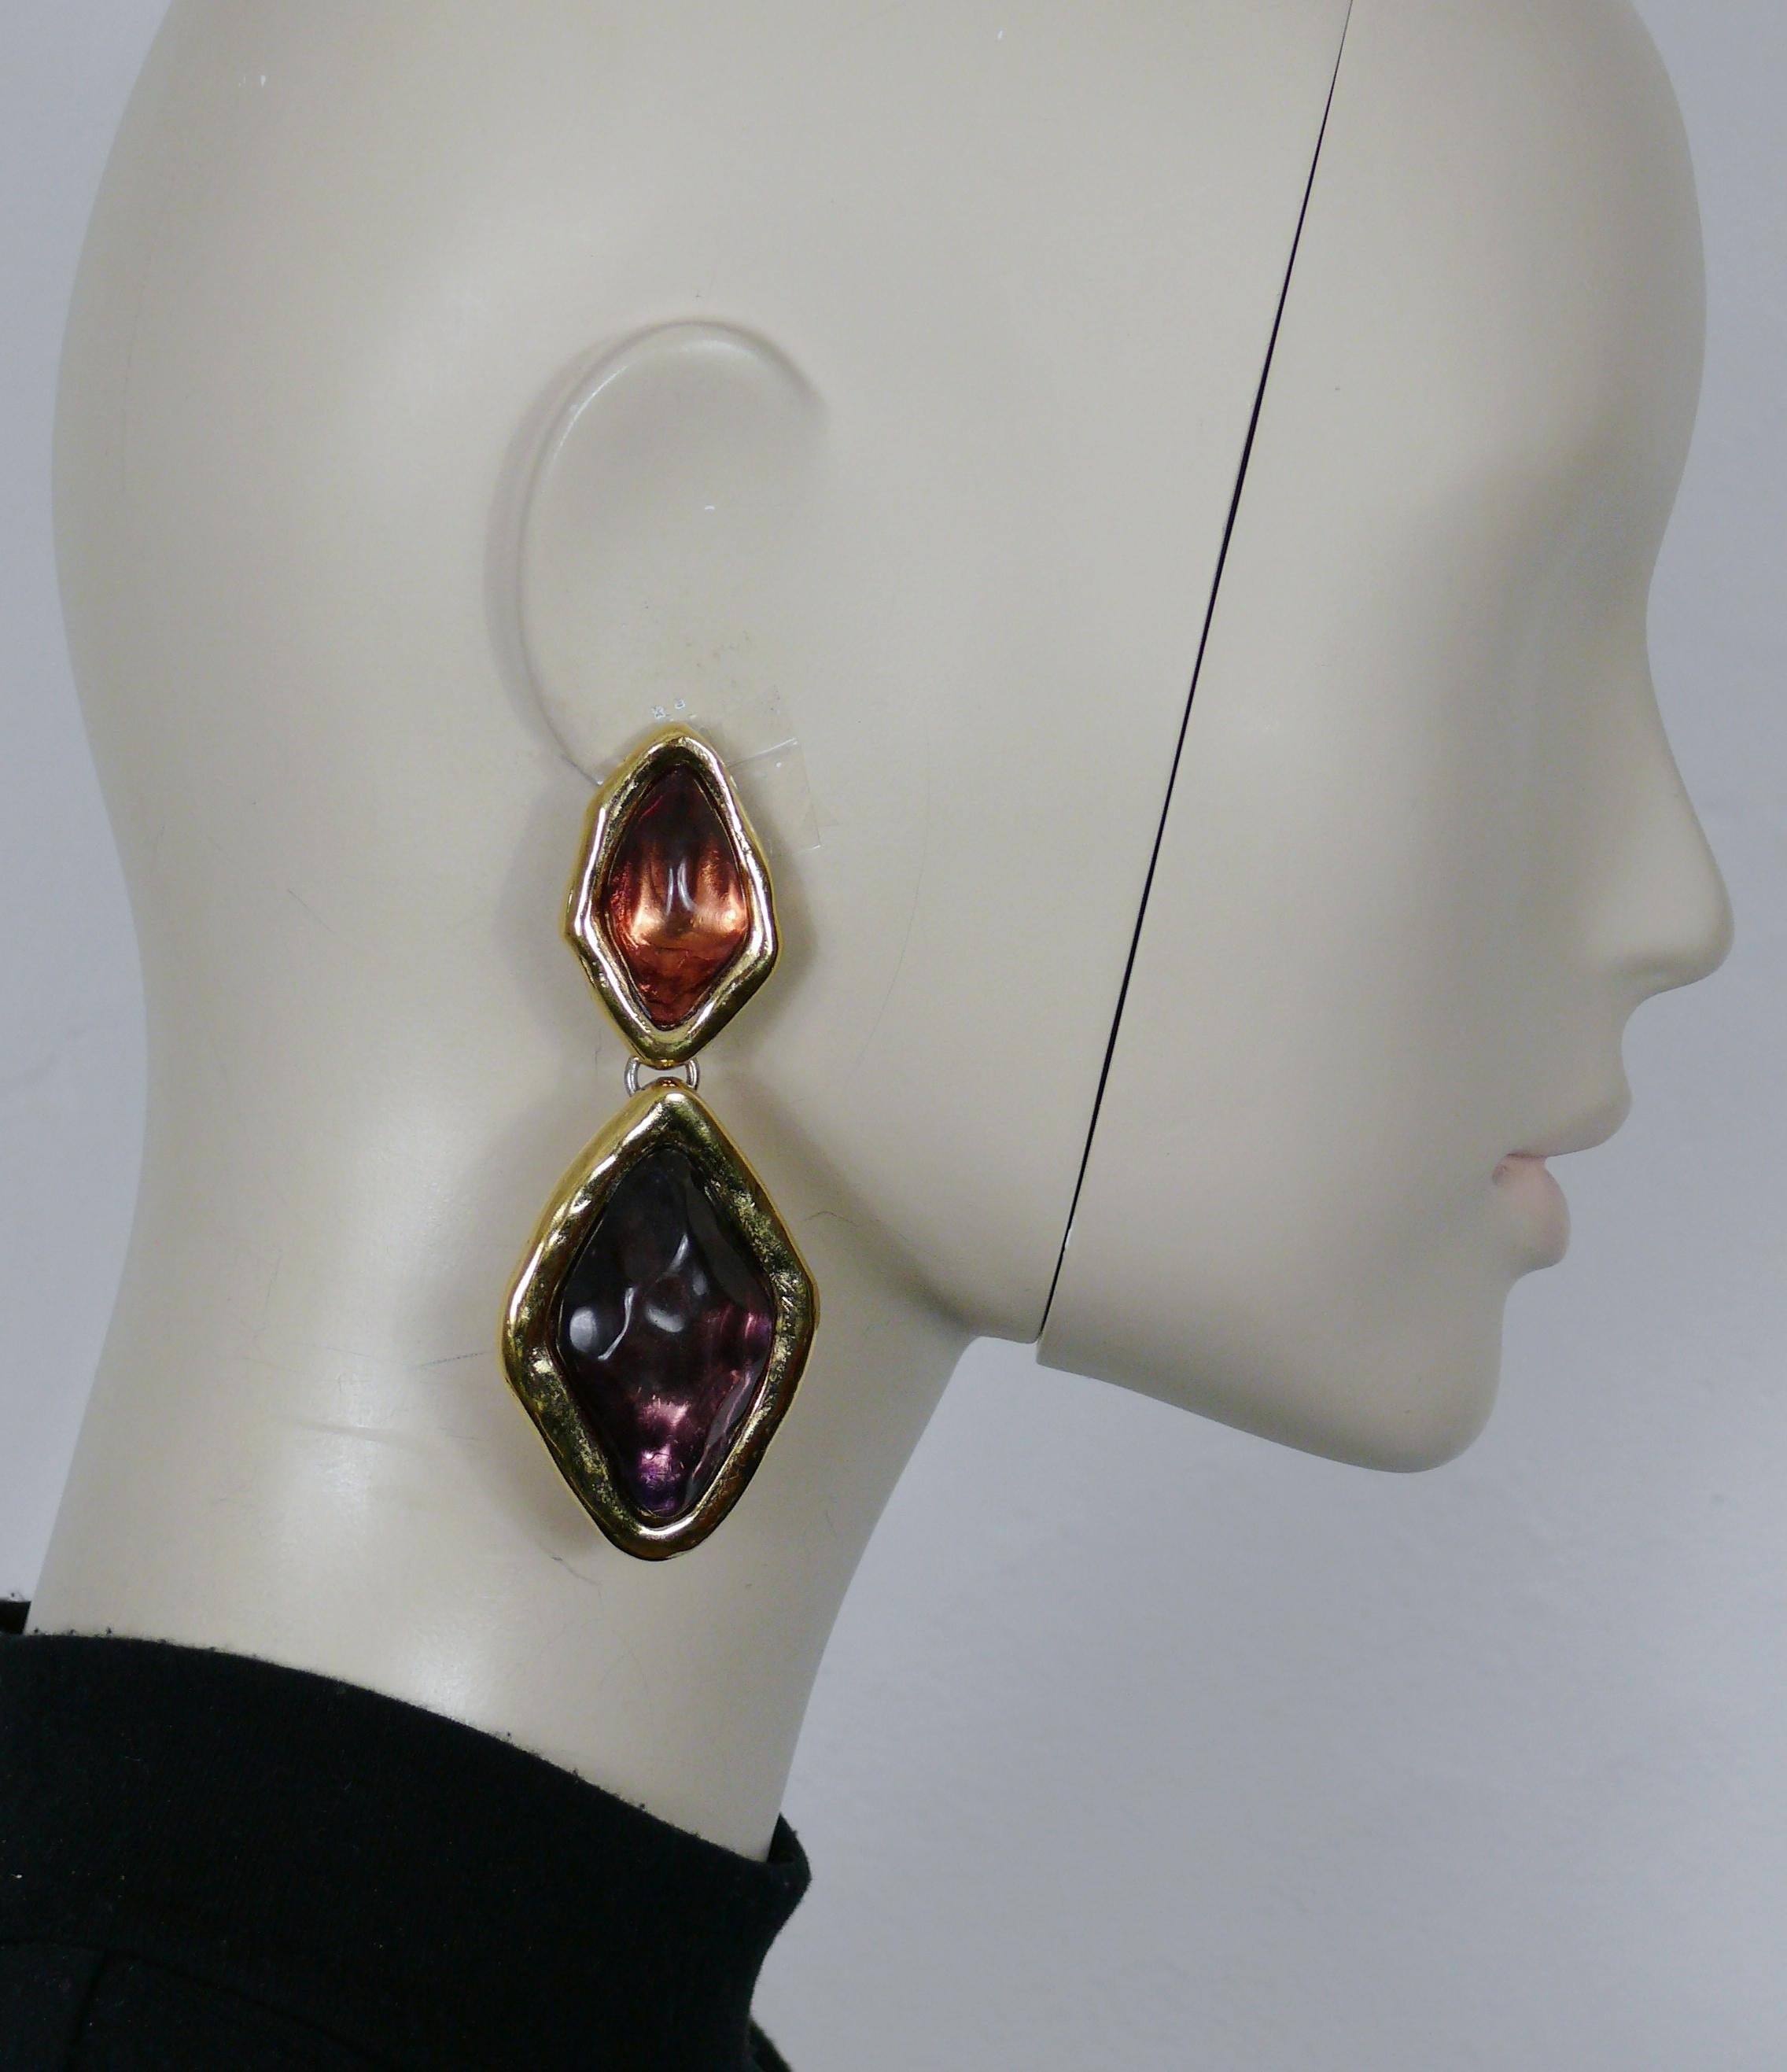 YVES SAINT LAURENT vintage gold tone diamond shaped dangling earrings (clip-on) embellished with purple resin cabochons (please note that the color of the top cabochon is slightly different than the bottom one).

Embossed YSL.

Indicative